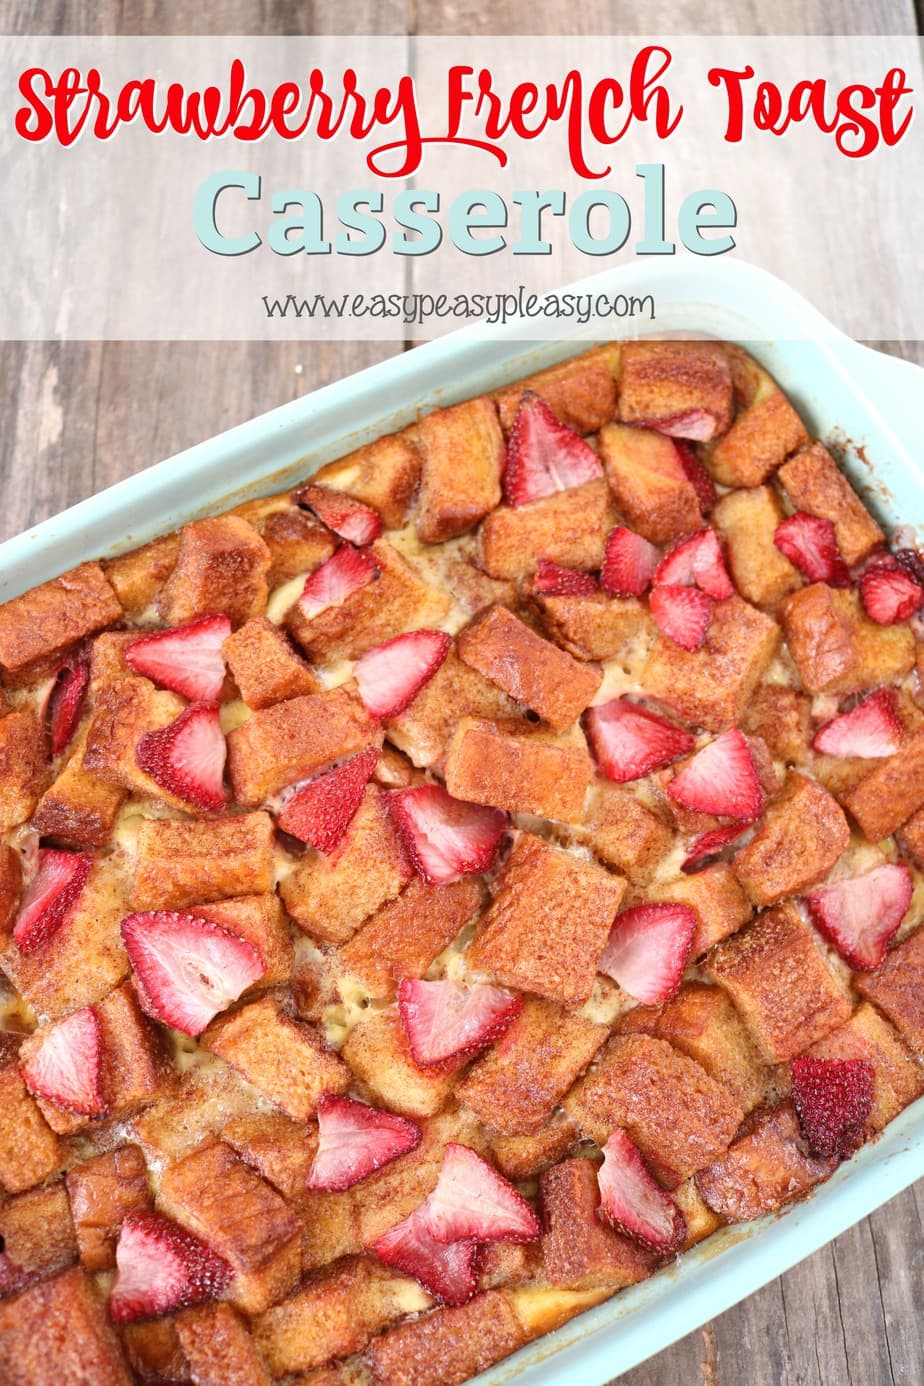 This Strawberry French Toast Casserole is sure to be a crowd pleaser. Only 7 ingredients to the perfect brunch or breakfast recipe.